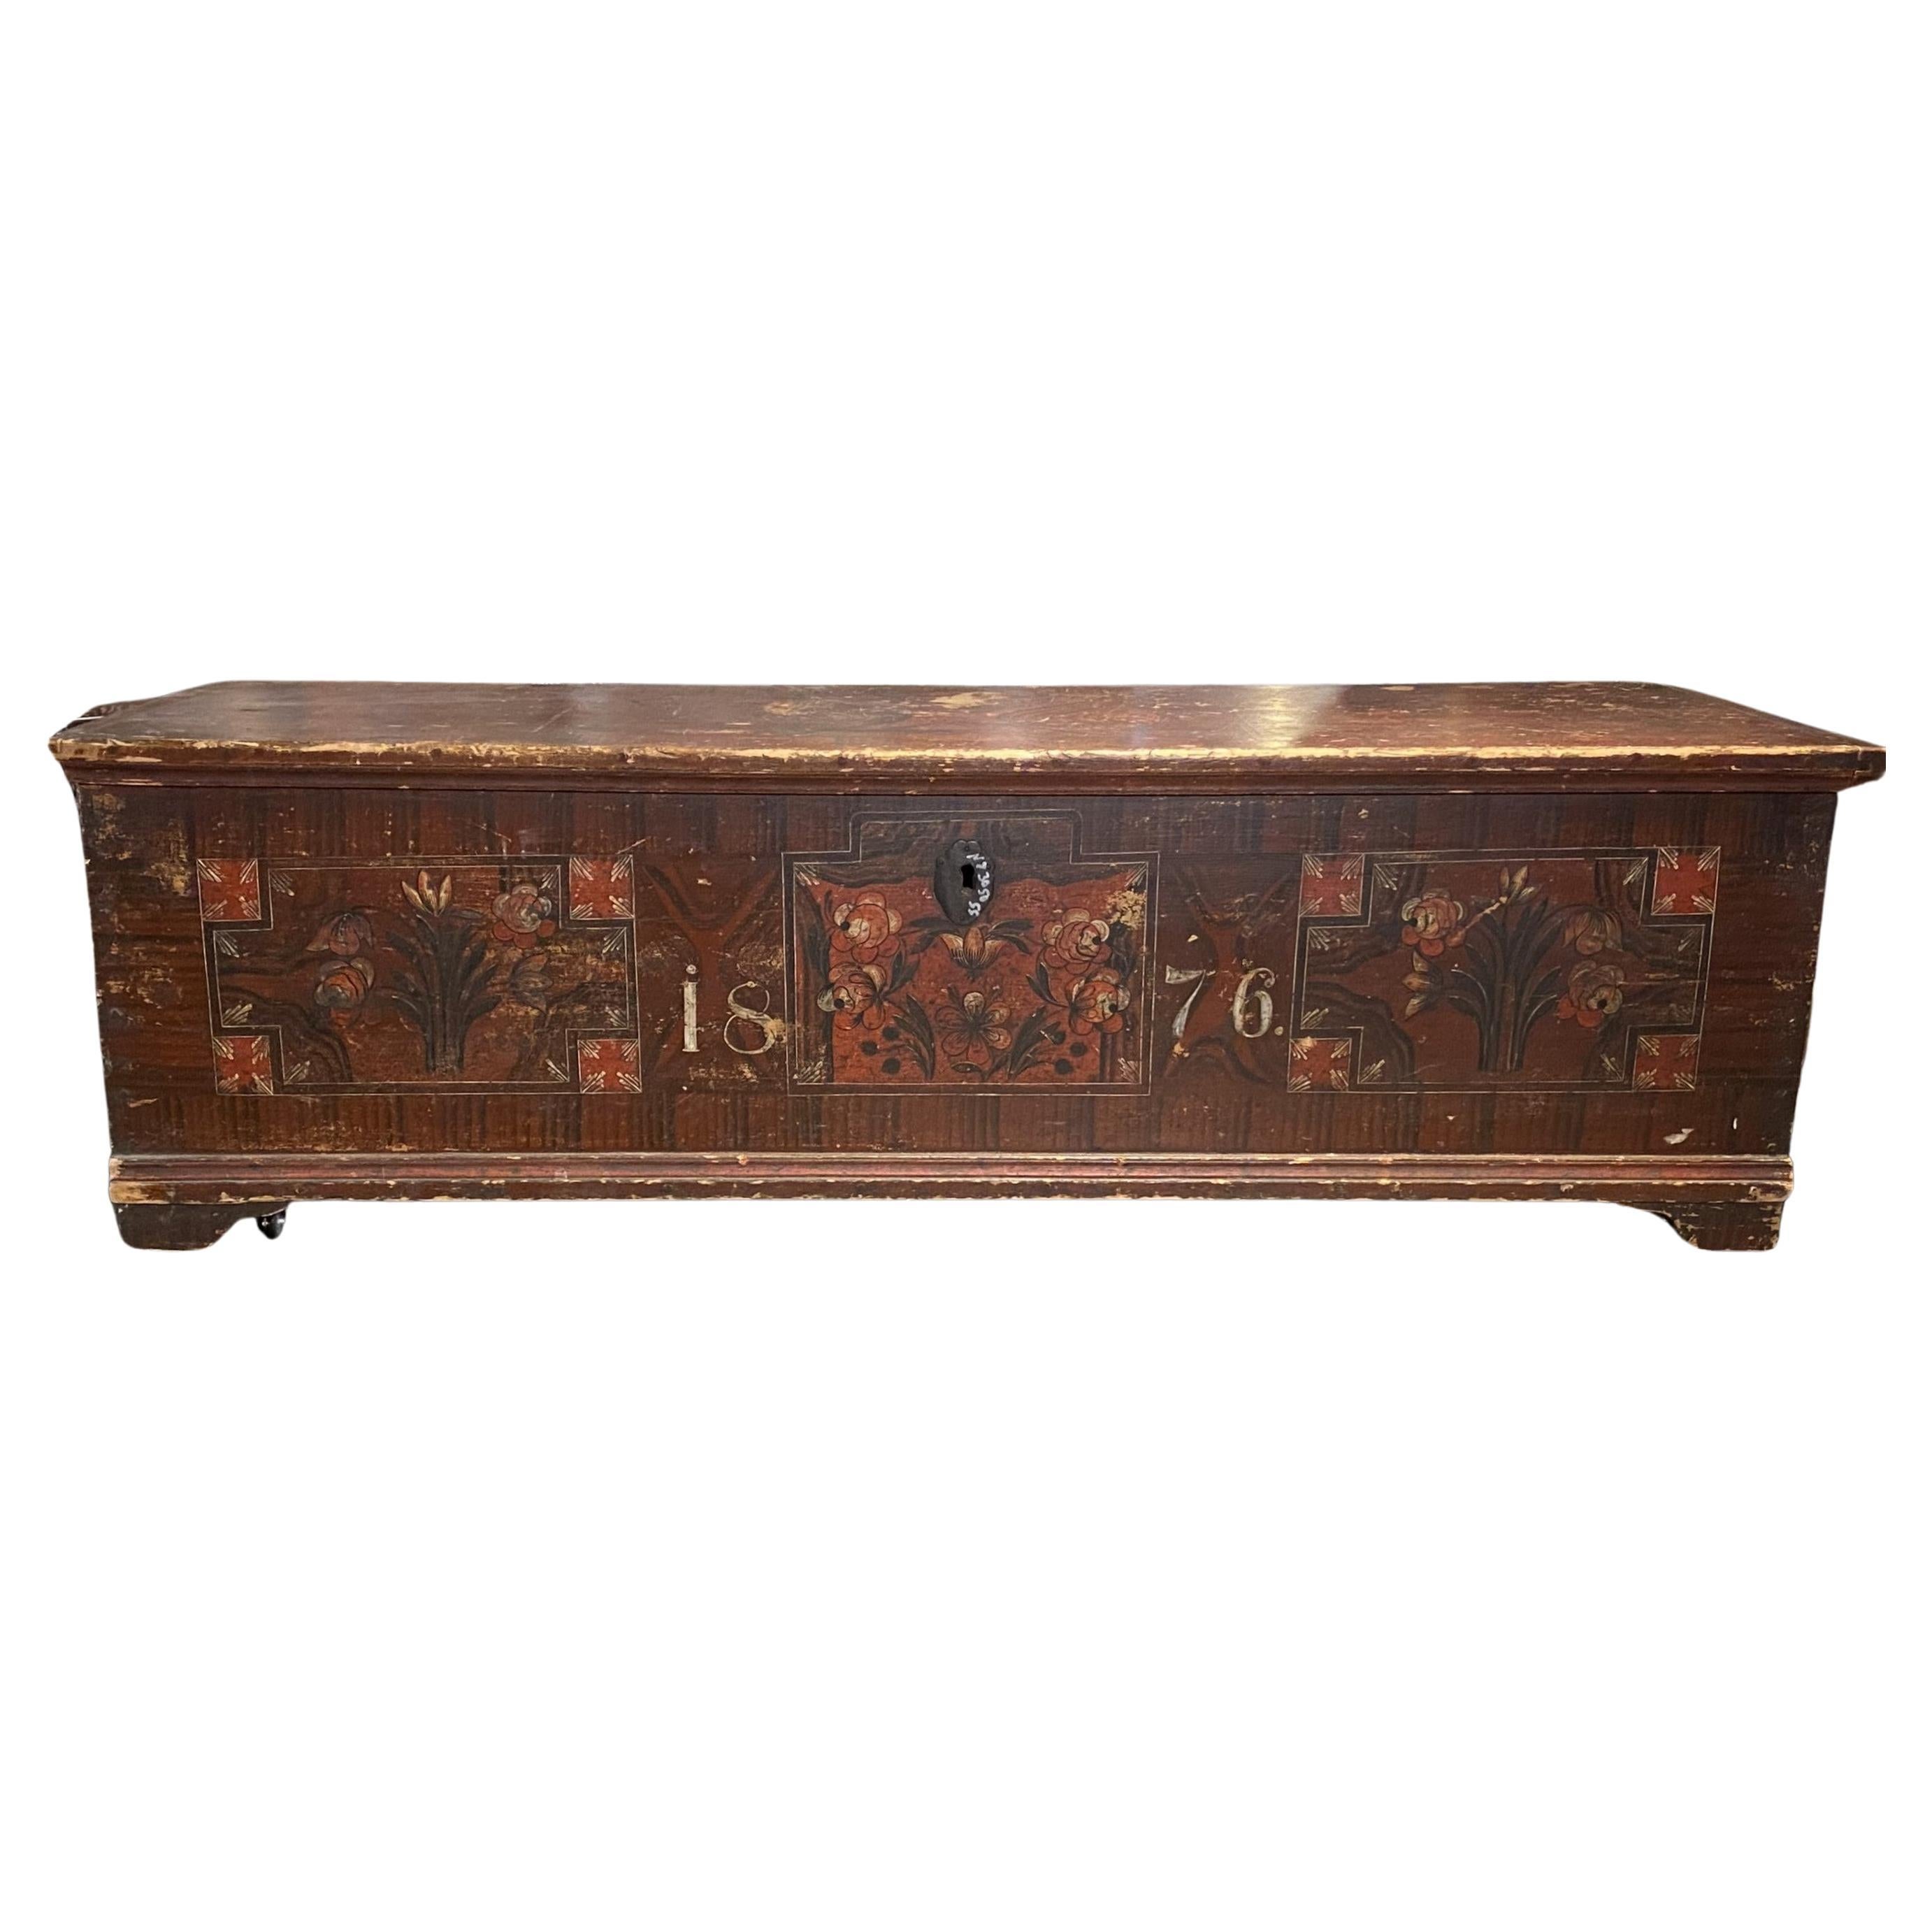 European Pine Paint Decorated Blanket Chest Dated 1876 For Sale